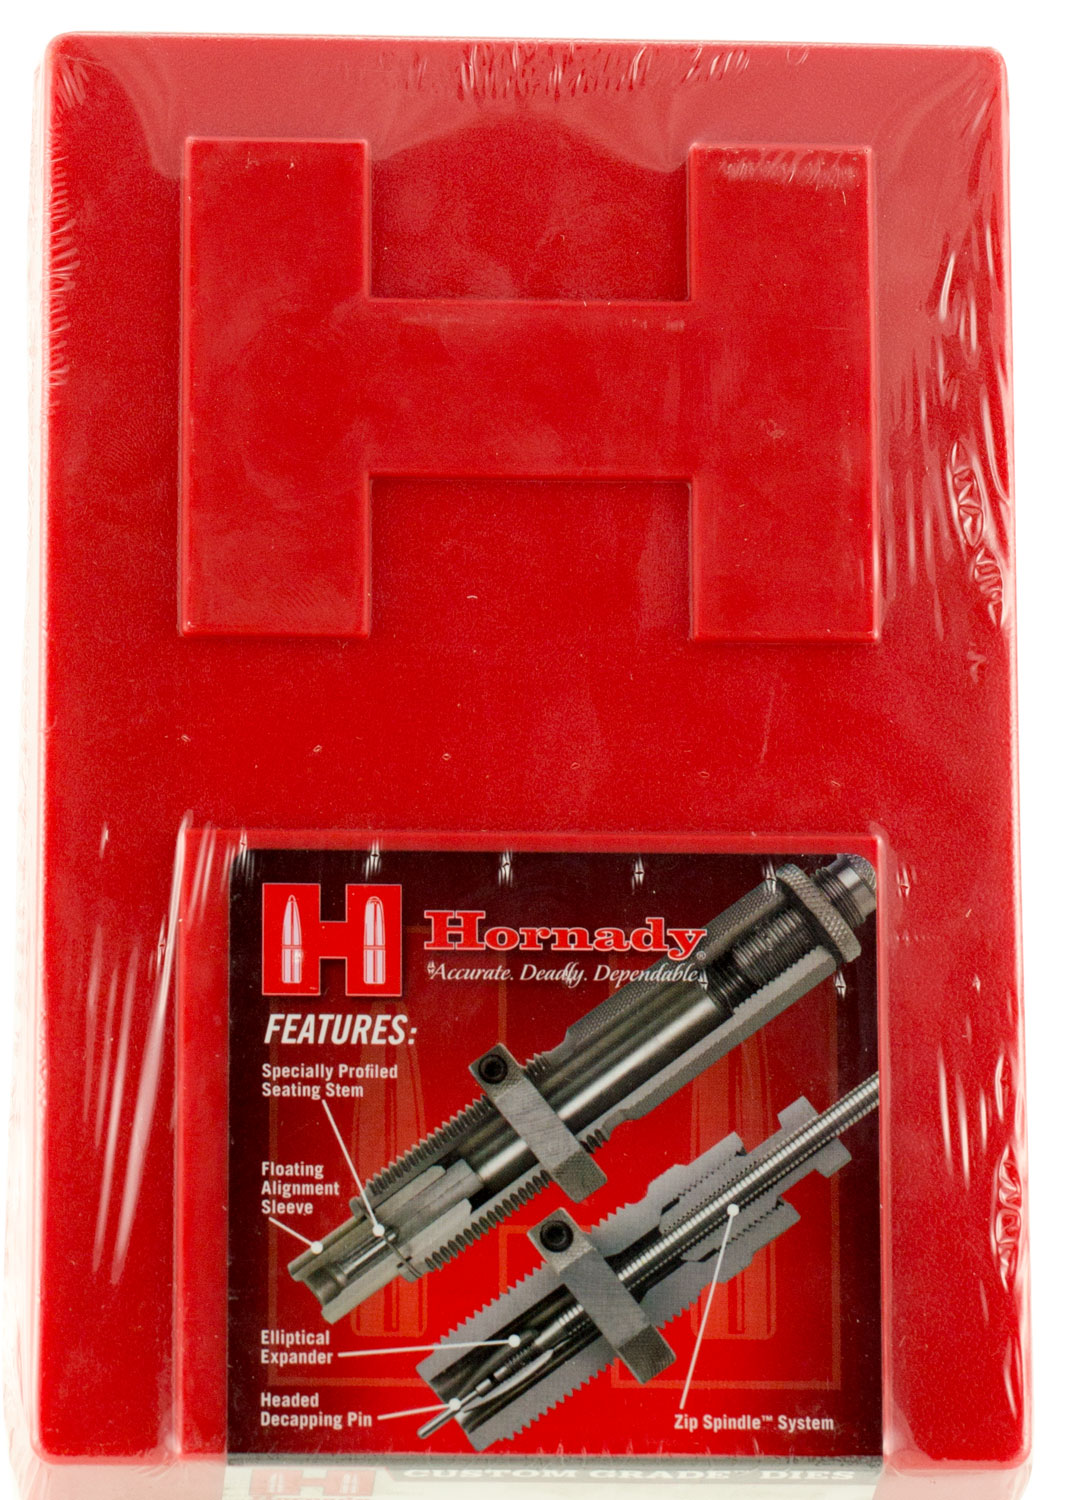 Hornady 546118 Custom Grade Series I 2 Die Set for 17 Hornet Includes Sizing Seater